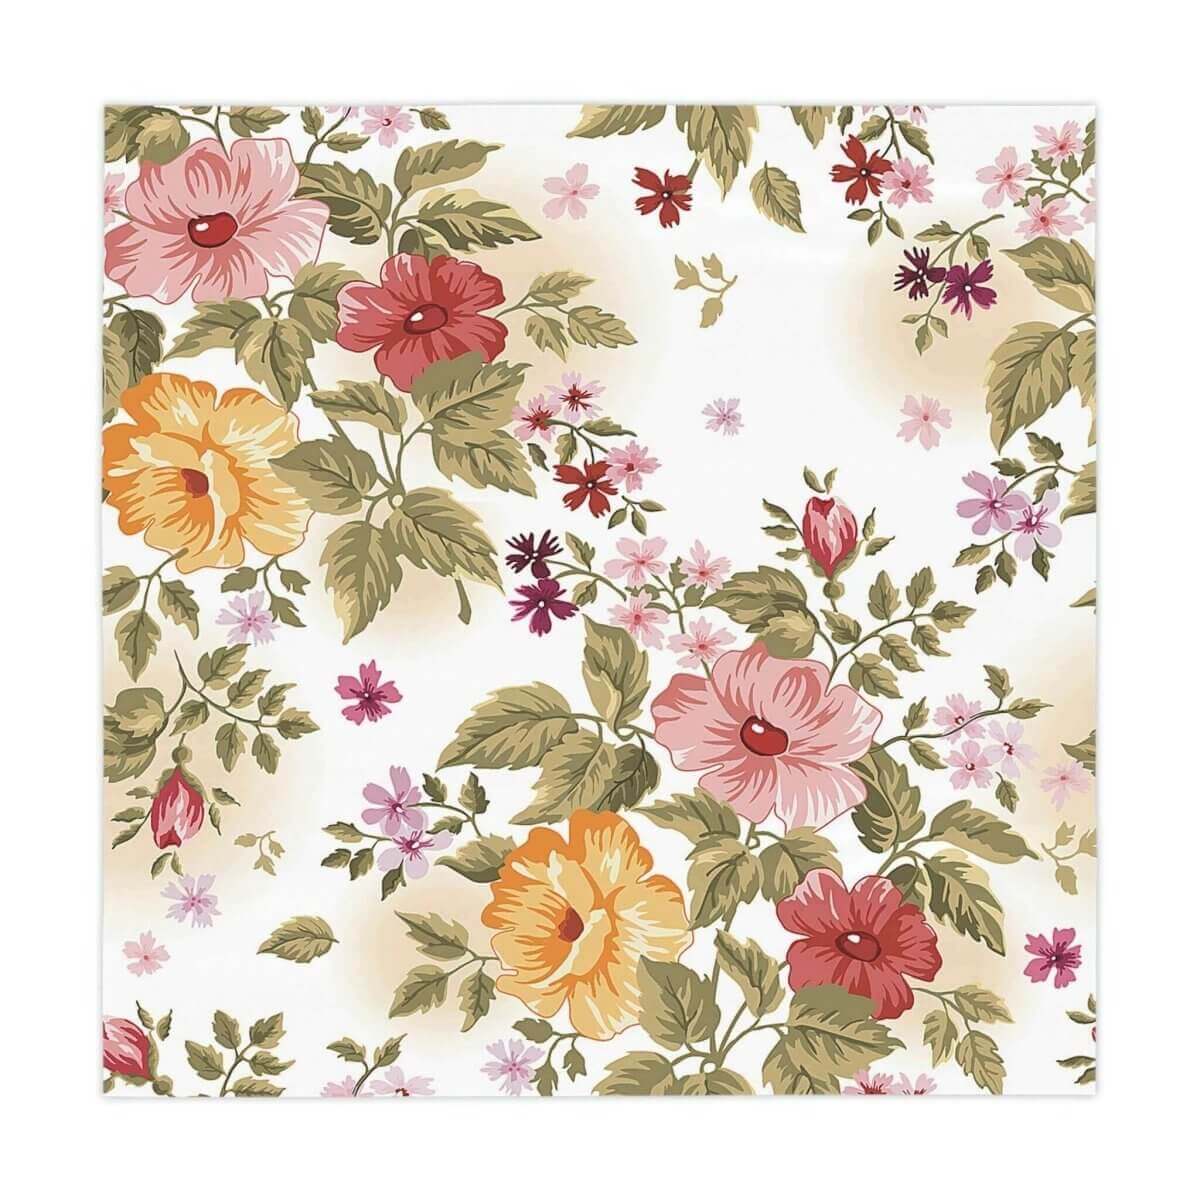 Floral Spring & Summer Tablecloth - Hearth Home & Living